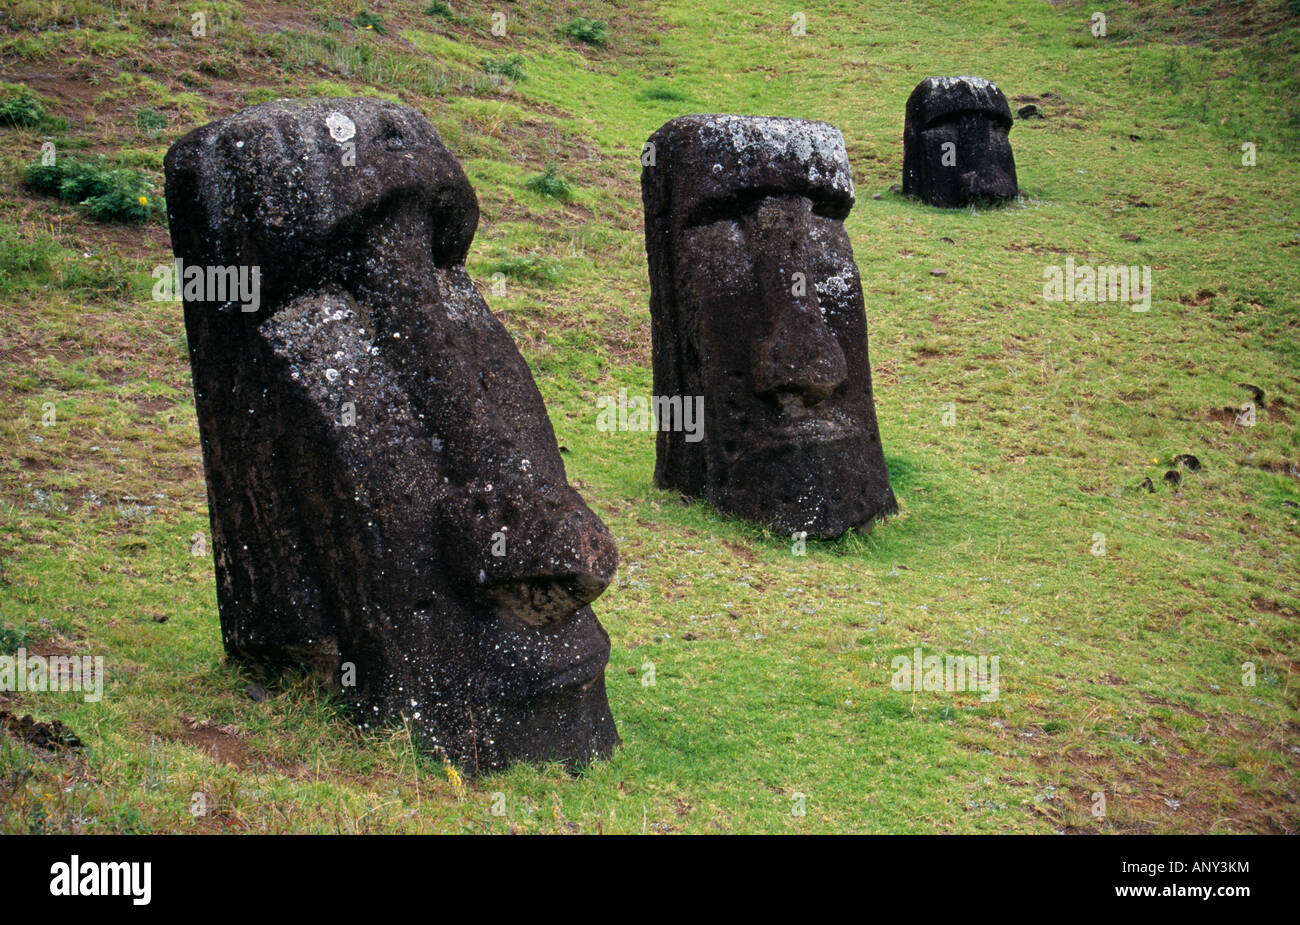 Chile, Easter Island, Rano Raraku. Moais - these are monolithic human figures carved from rock on Easter Island (Rapa Nui). Stock Photo